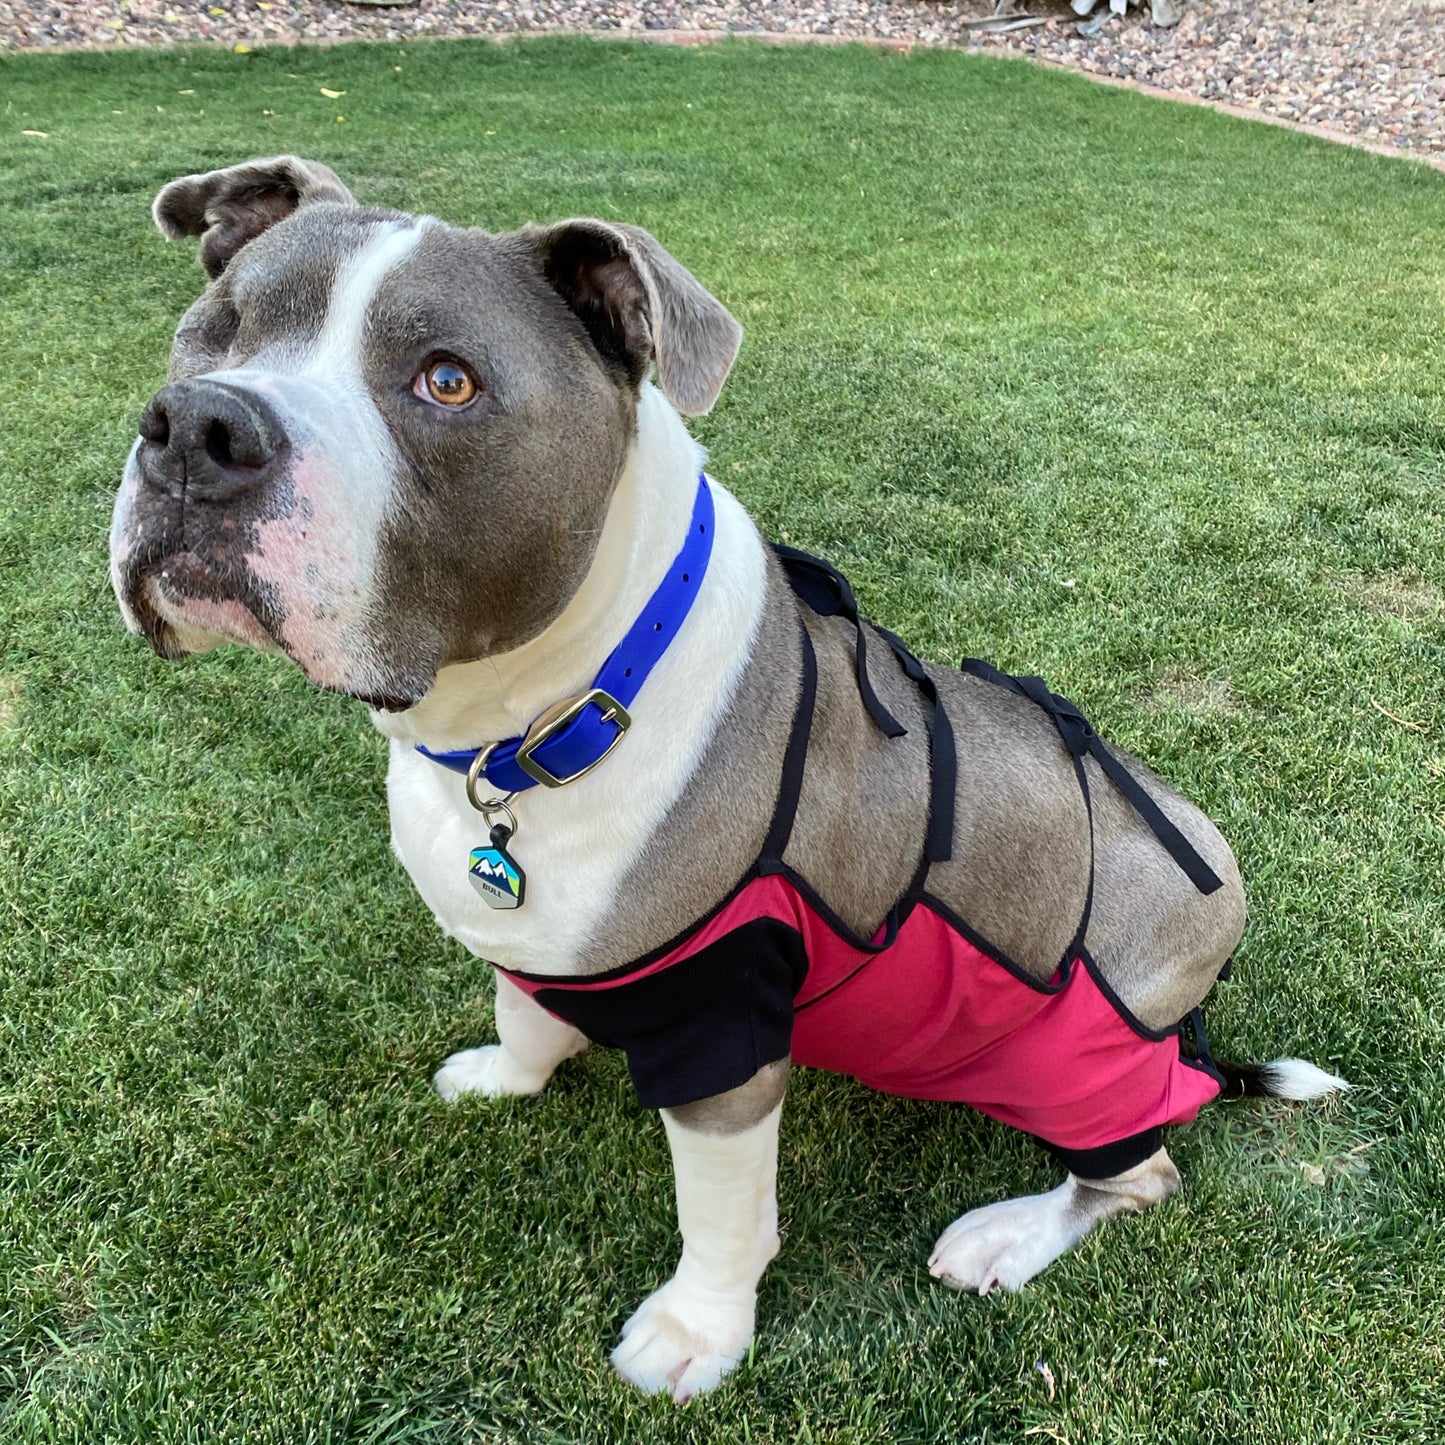 a grey and white pit bull wearing a burgundy recovery gown garment and blue collar, sitting on grass